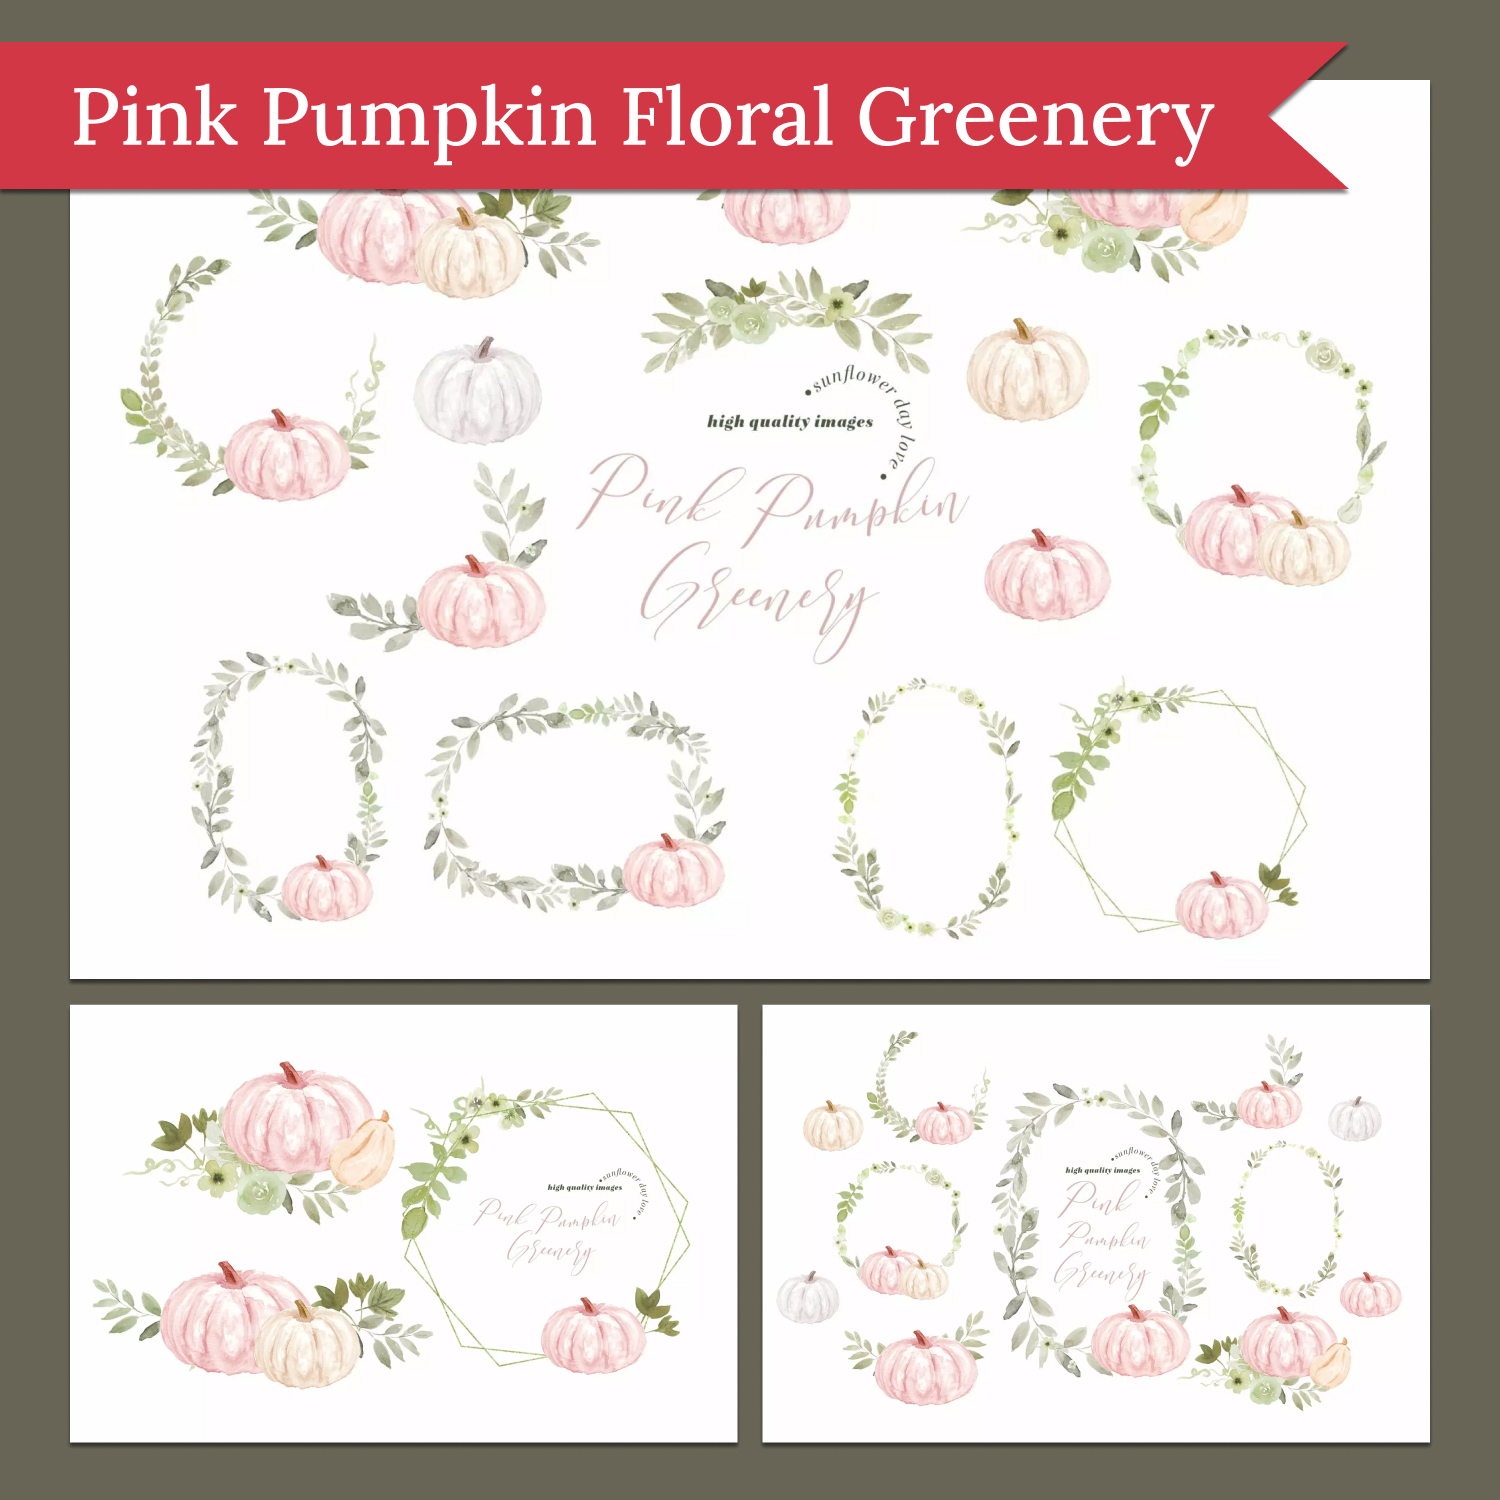 Prints of pink pumpkin floral greenery clipart.